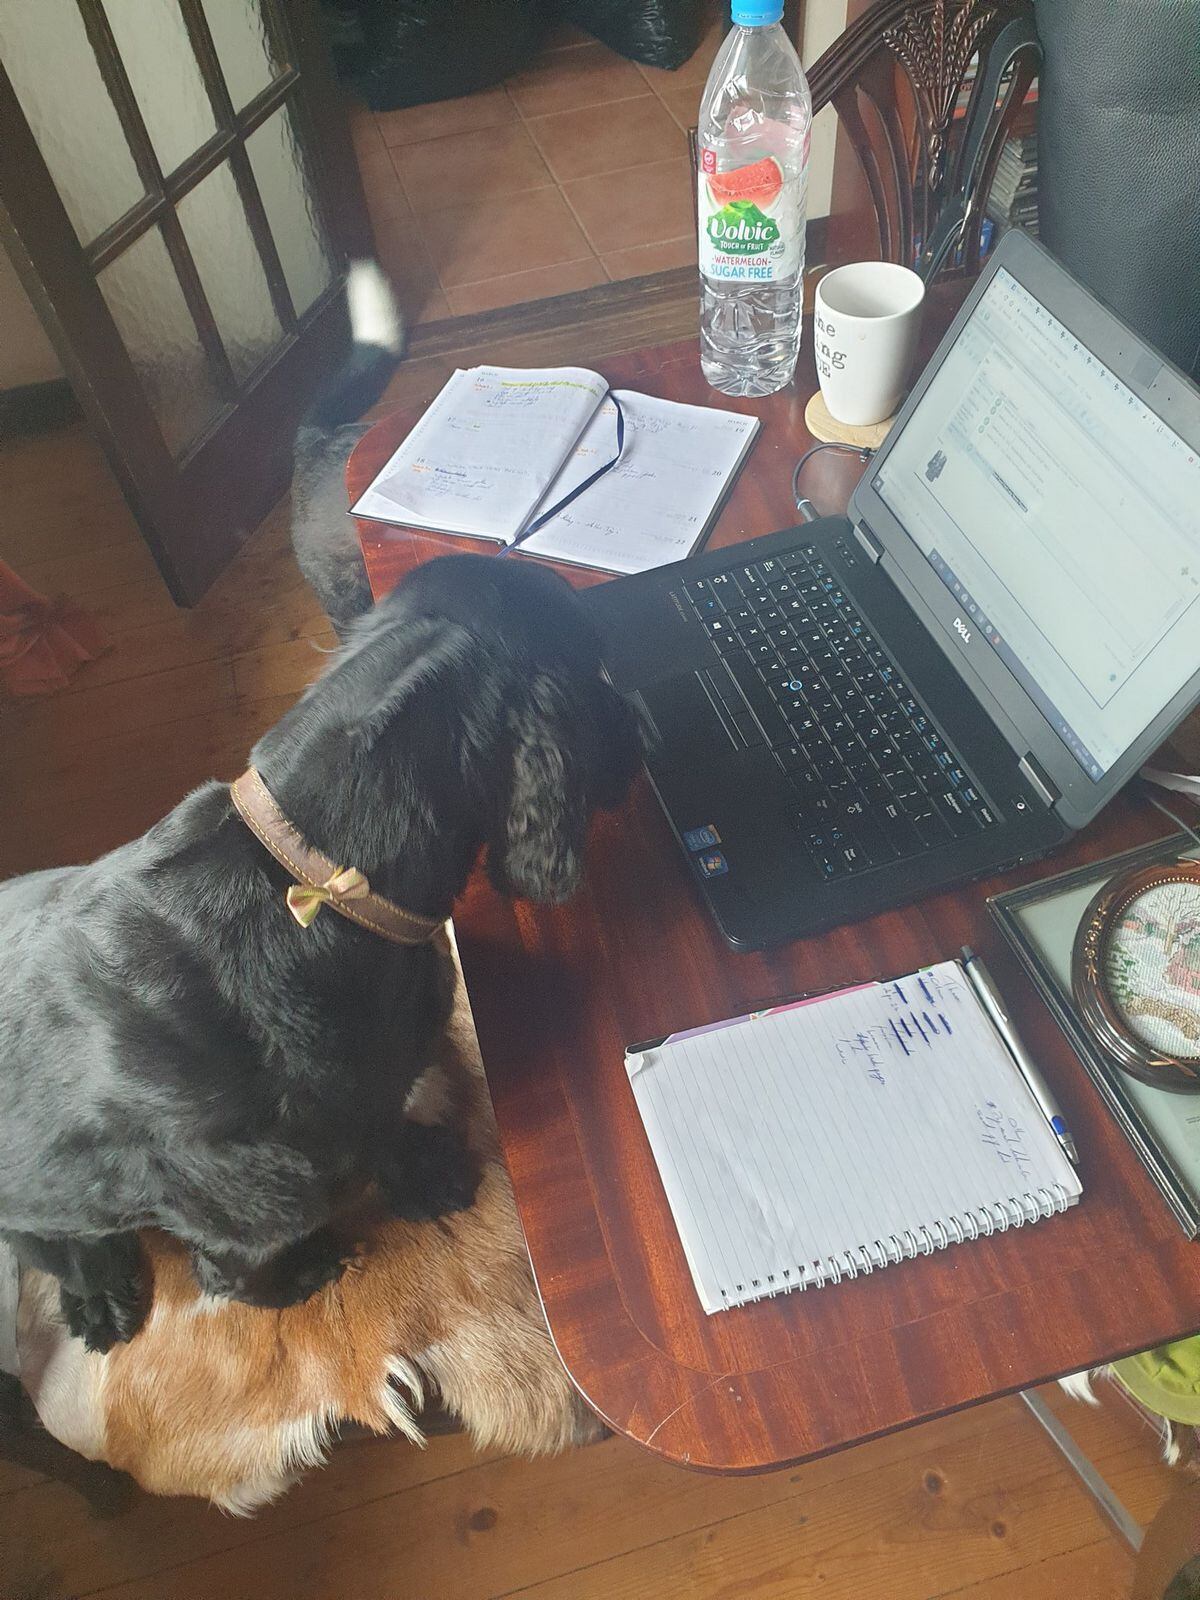 Barney working on filing some stories with Express & Star digital entertainment editor Rebecca Sayce